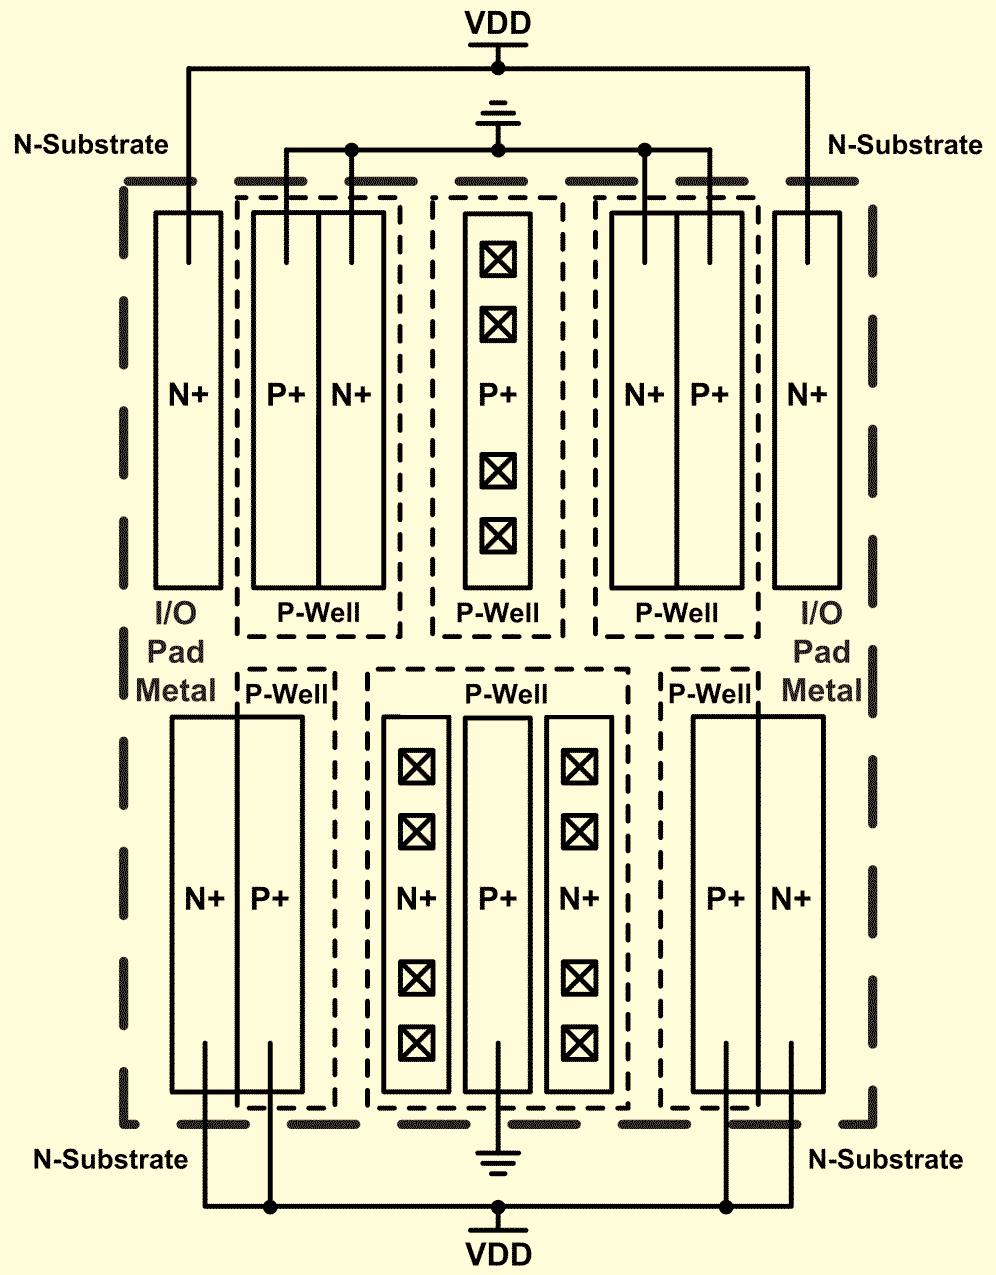 12 Recent Patents on Engineering 2007, Vol. 1, No. 2 Ker and Hsiao high-current capability, multiple P+ diffusions are connected in parallel to form the waffle diode structure. As shown in Fig.